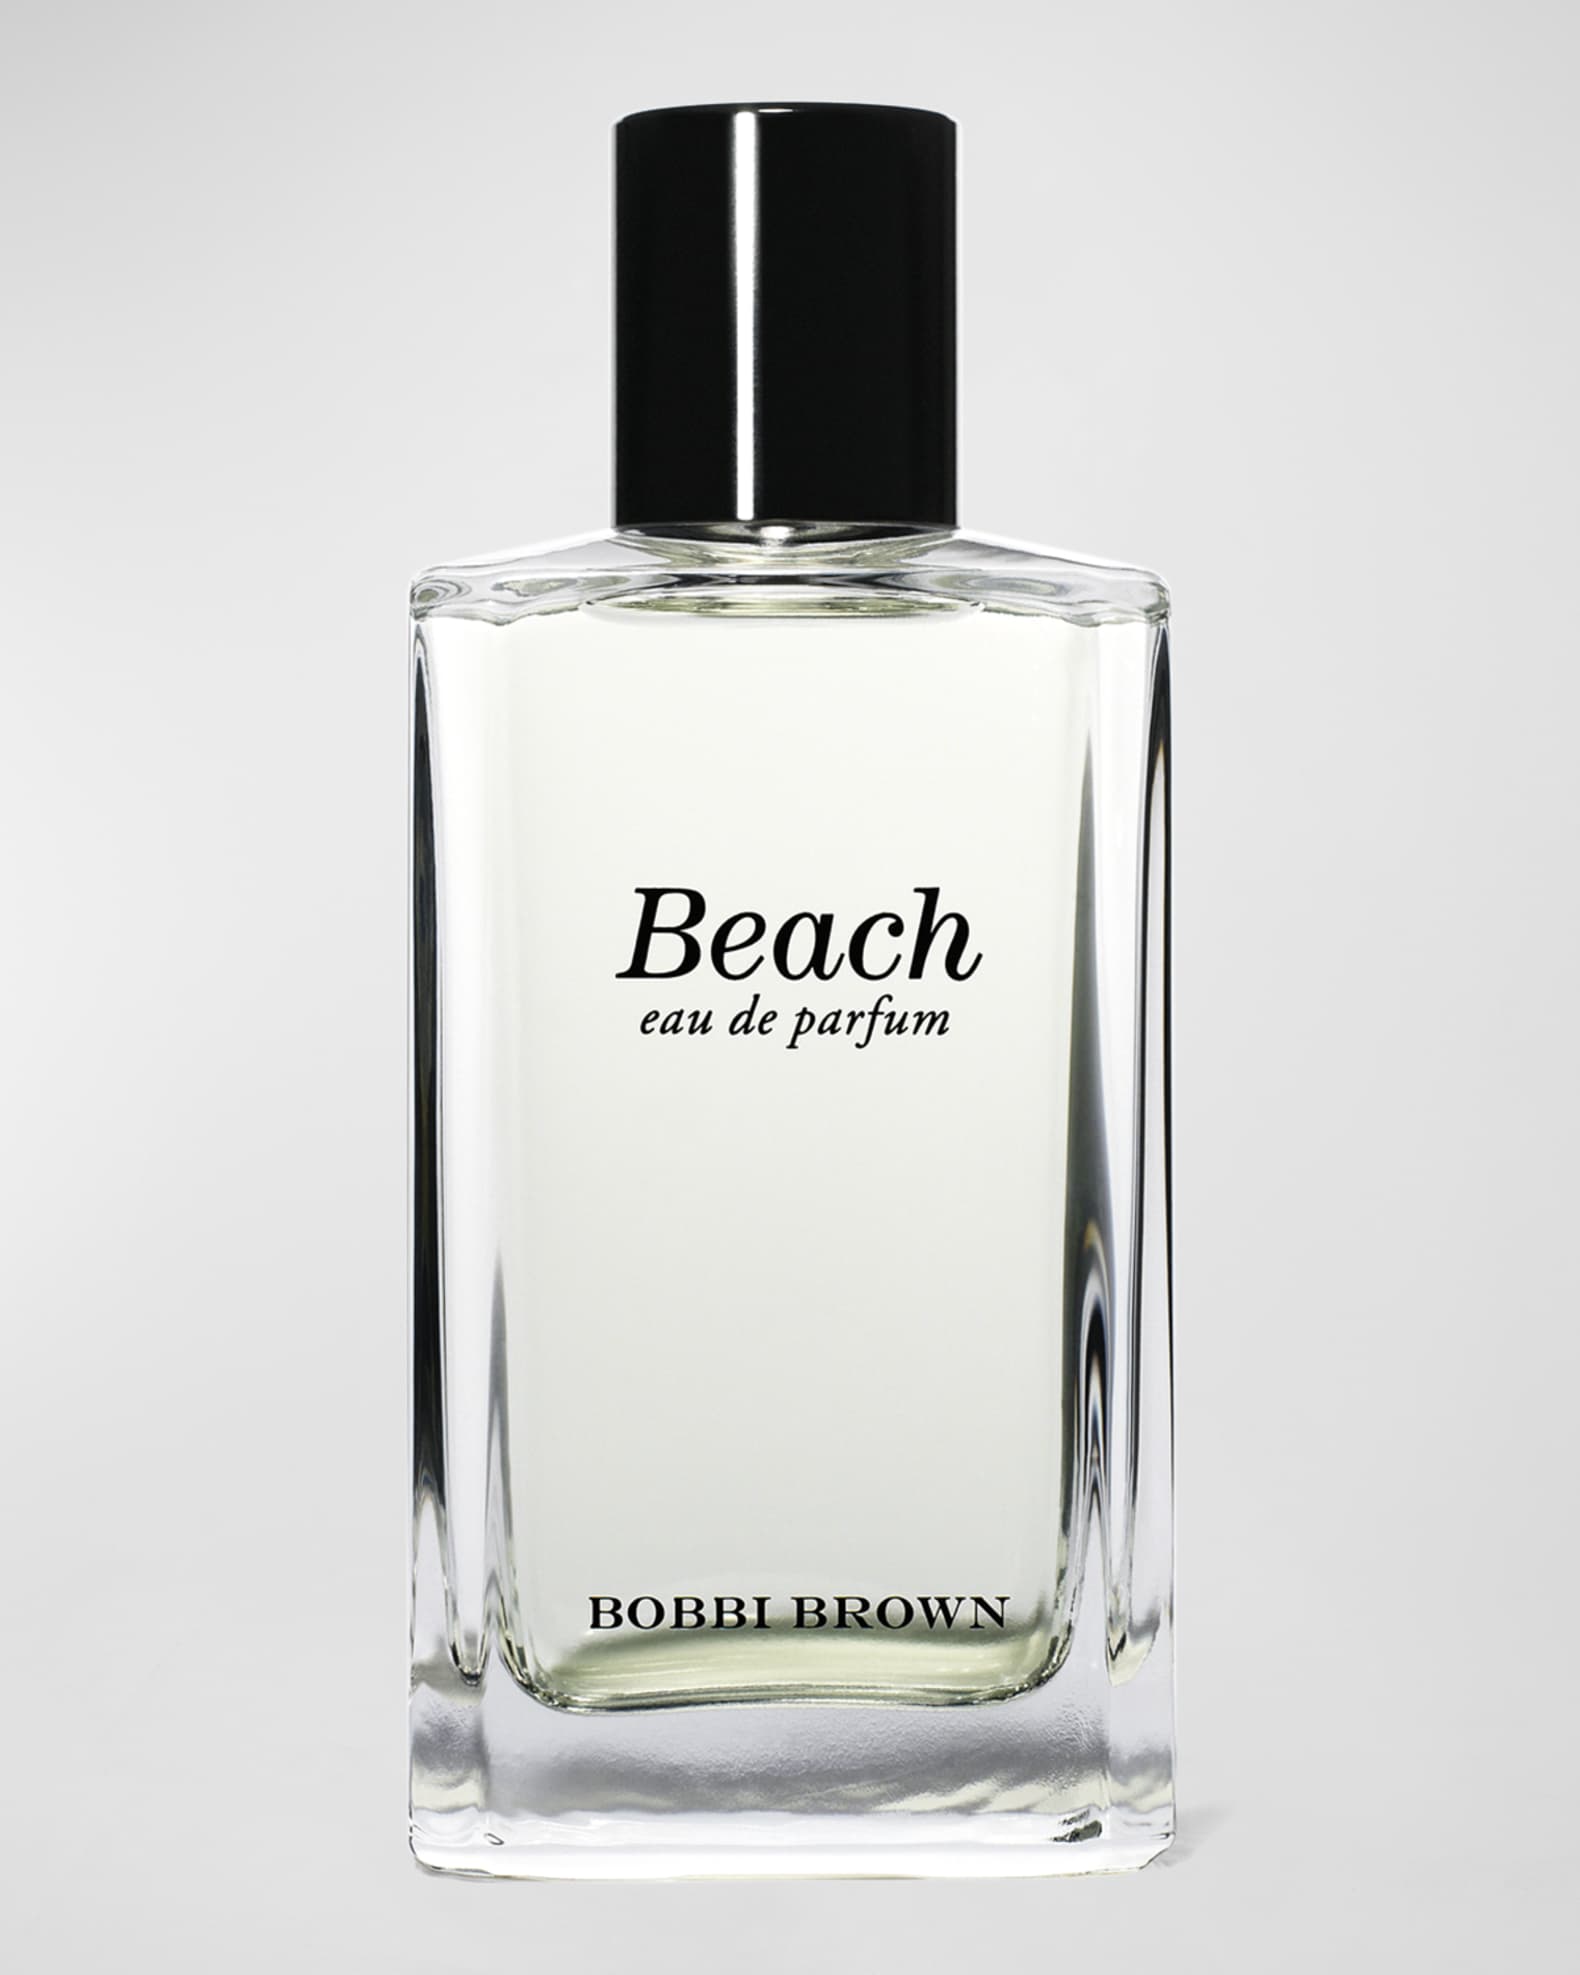 LOUIS VUITTON ON THE BEACH FRAGRANCE REVIEW